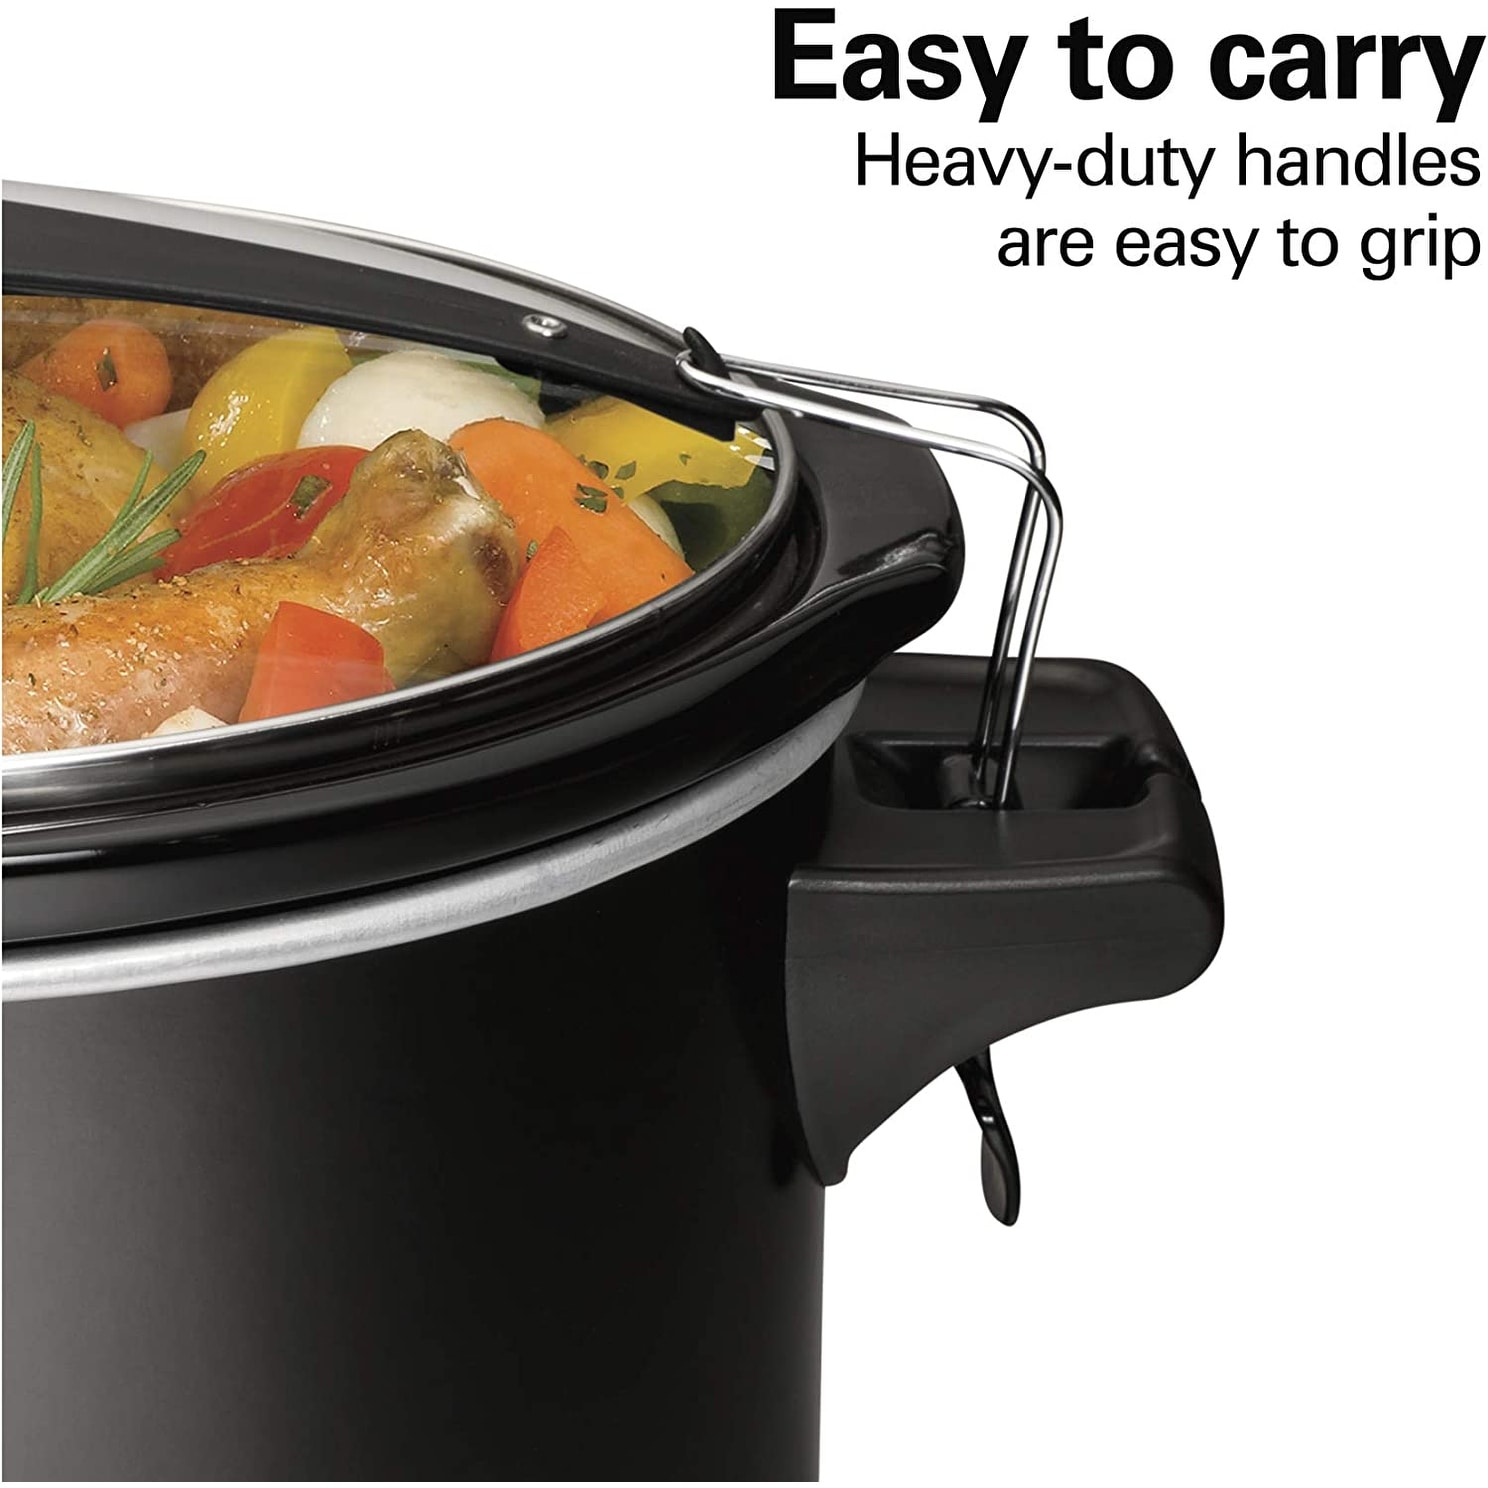 https://ak1.ostkcdn.com/images/products/is/images/direct/c4ba09ae98275743ccc59723a545caf10978bef5/Slow-Cooker%2C-Extra-Large-10-Quart%2C-Stay-or-Go-Portable-With-Lid-Lock%2C-Dishwasher-Safe-Crock.jpg